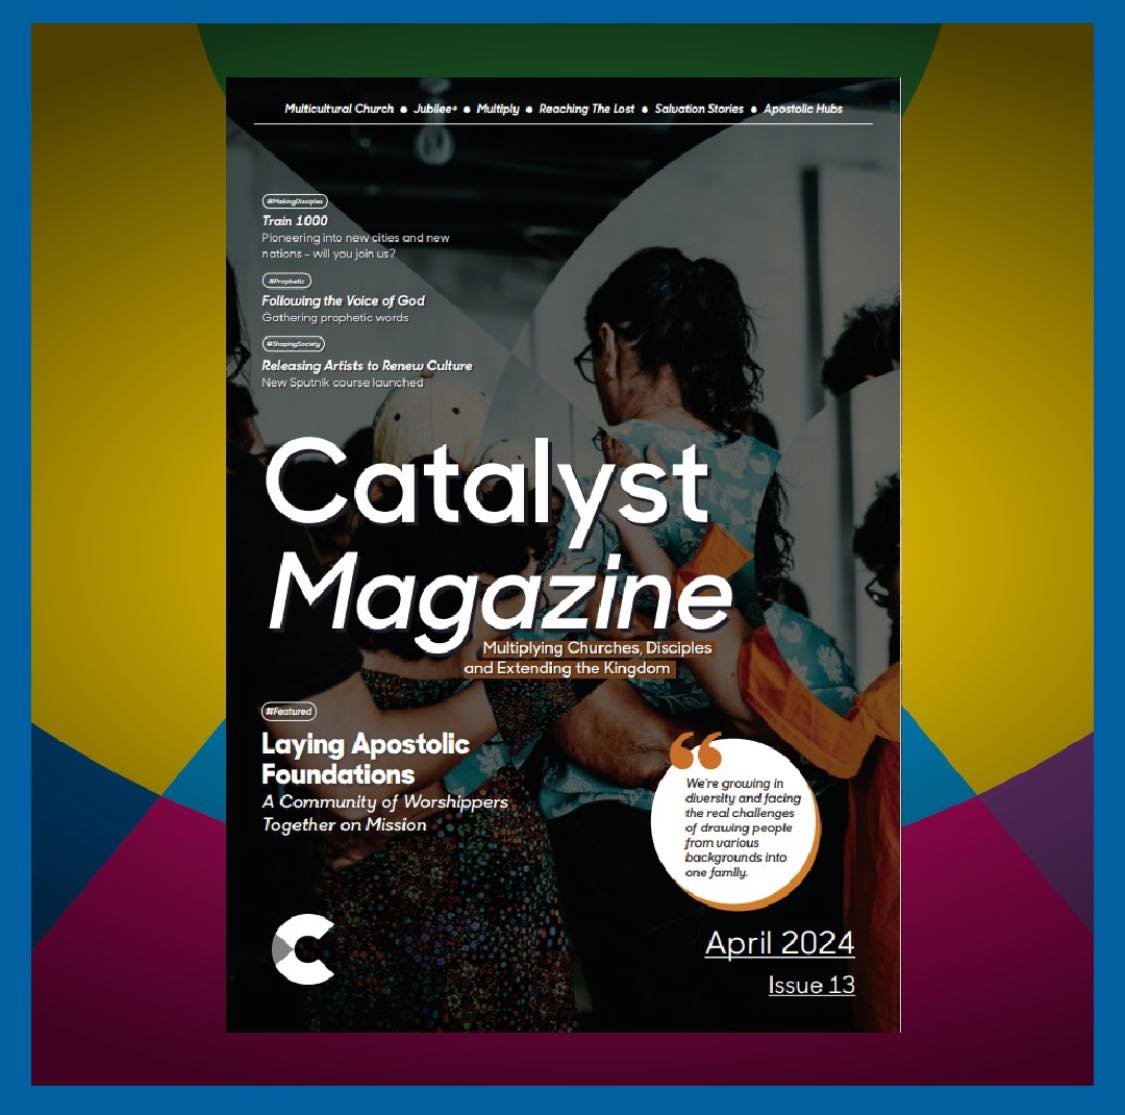 The latest Catalyst issue is out now 🥳🥳

Learn more about the Apostolic and Prophetic Foundations and how they shape who we are as a community.

The entire issue is available on the Catalyst Network website. 

#catalystchurches #emmanuelsheffield